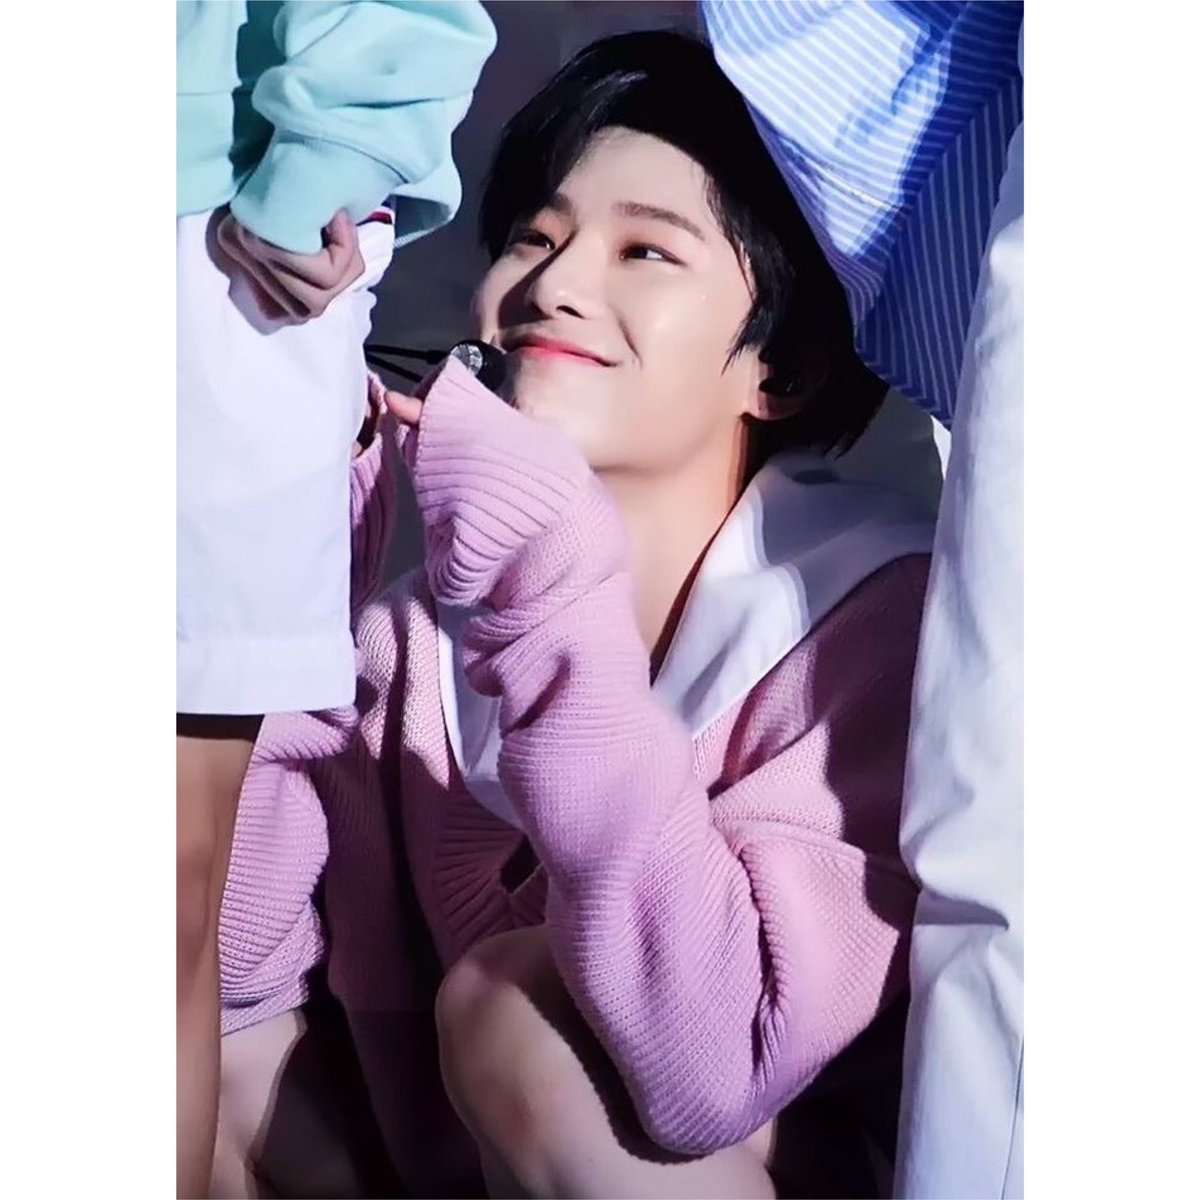 D-455 until Seungyoun gets discharged

🏠: 21. July 2025

🖼️: cute pic

#WOODZ #woodz_dnwm  #ChoSeungyoun #MOODZ

Follow & turn on the 🔔 to not miss any daily countdown :)